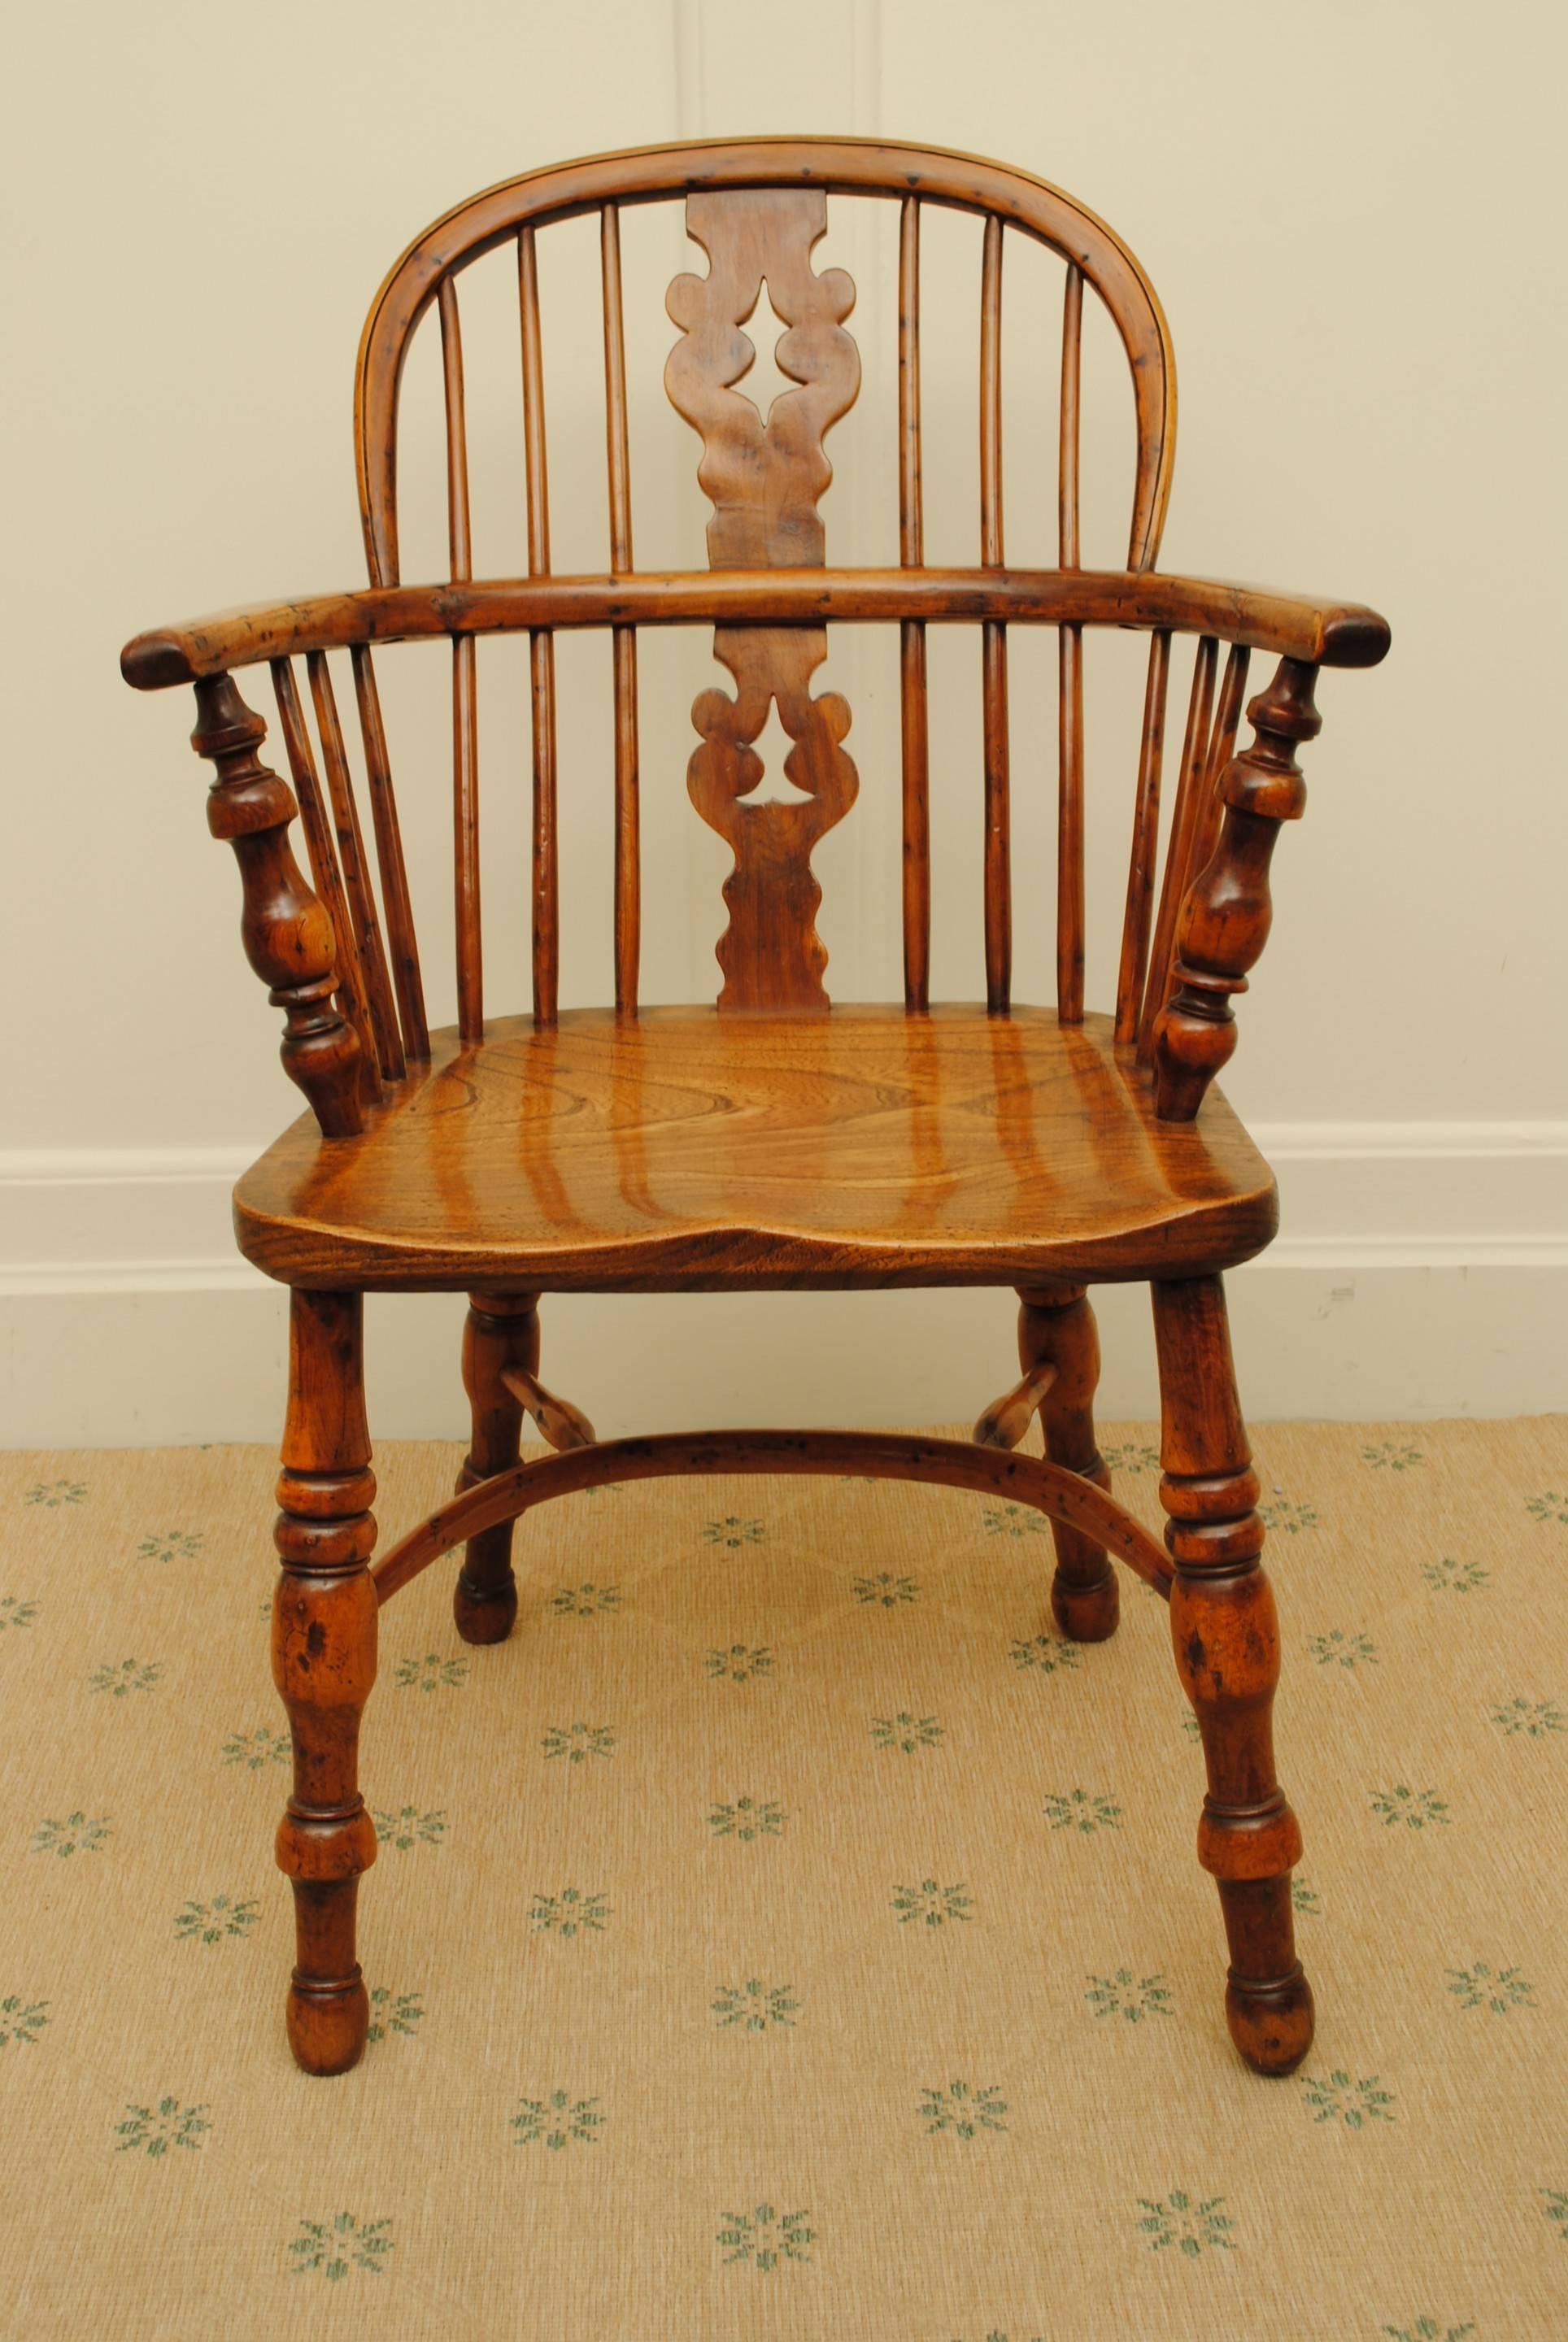 A fine 19th century Nottinghamshire yew tree low back armchair